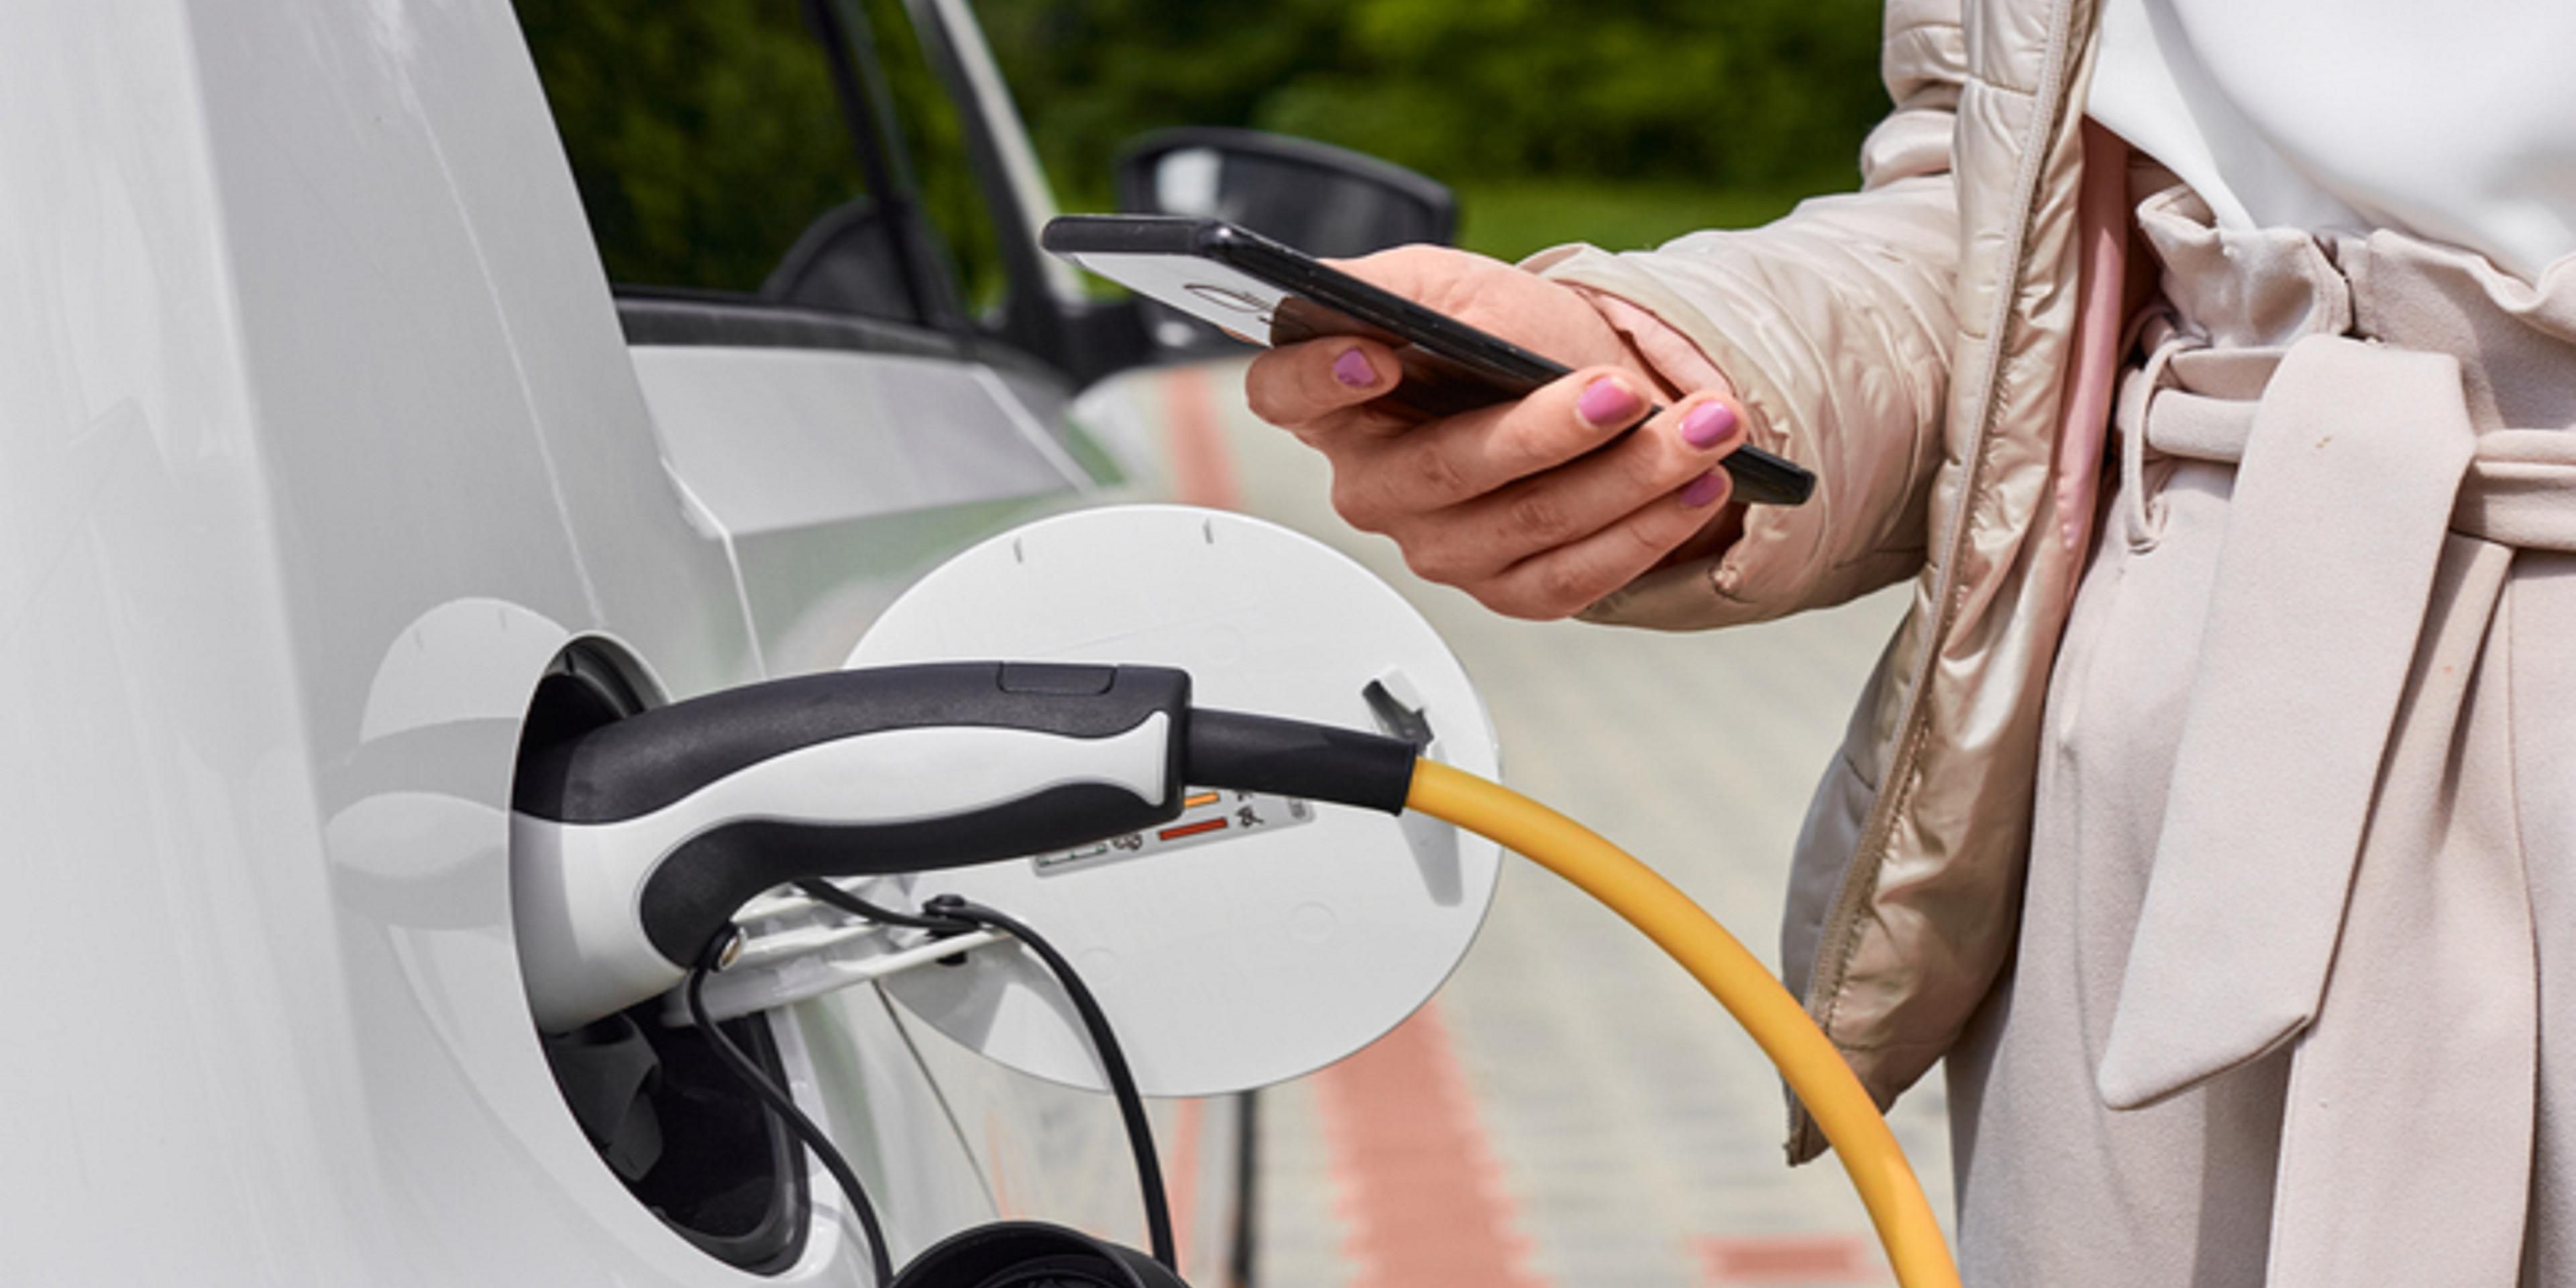 If you drive an electric vehicle, visit one of our convenient electronic charging stations during your stay. Please inquire about the fee.